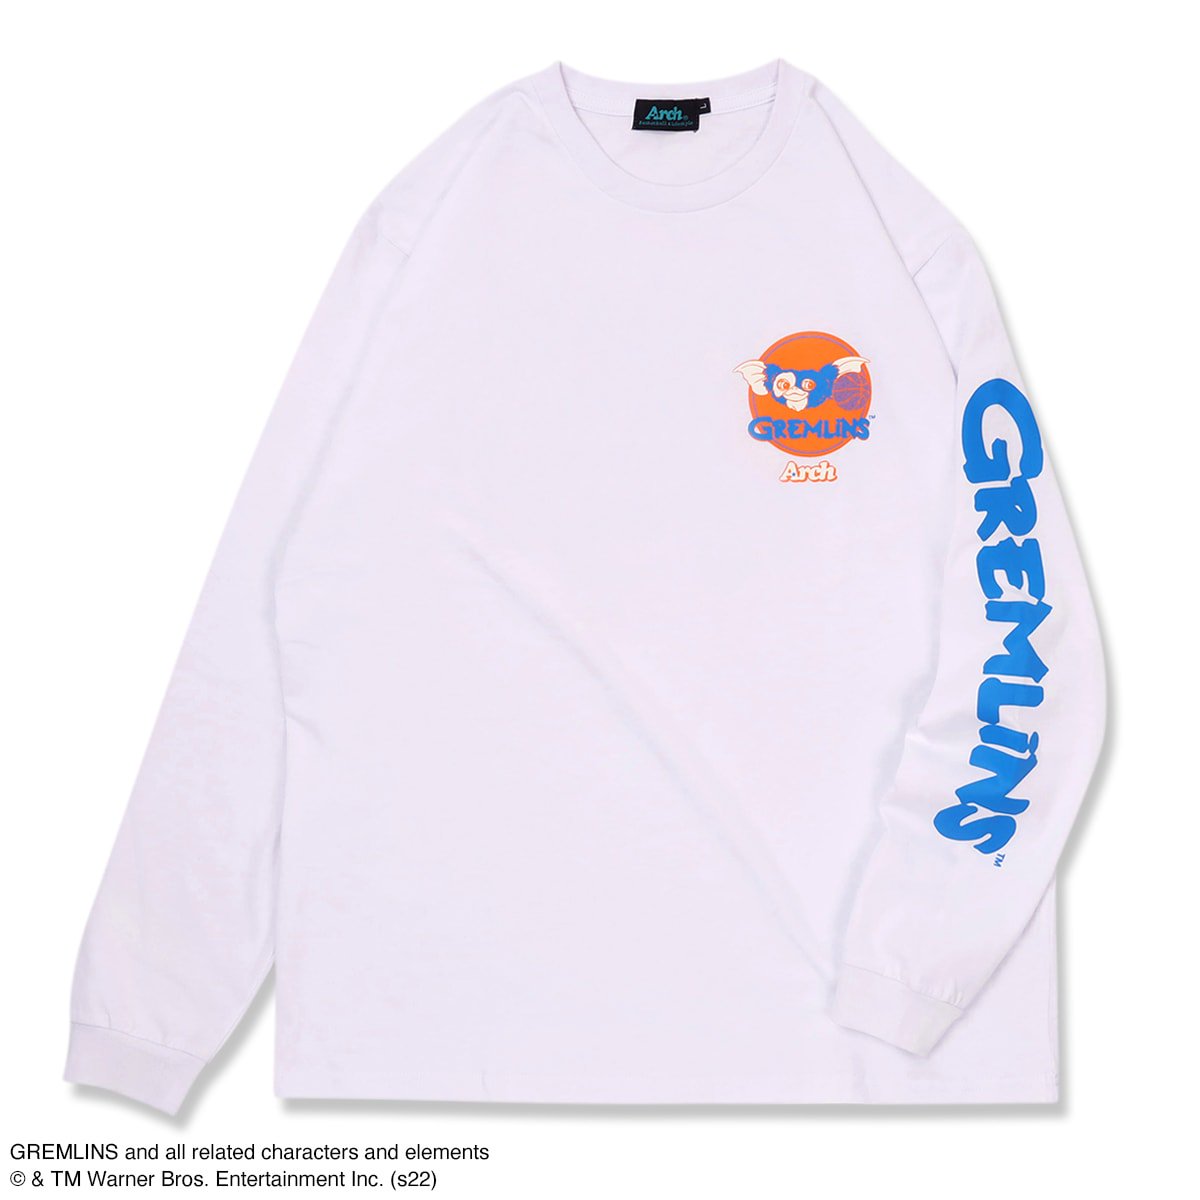 GREMLINS | Arch happy holidays L/S tee【white】 - Arch ☆ アーチ  [バスケットボール＆ライフスタイルウェア Basketball&Lifestyle wear]